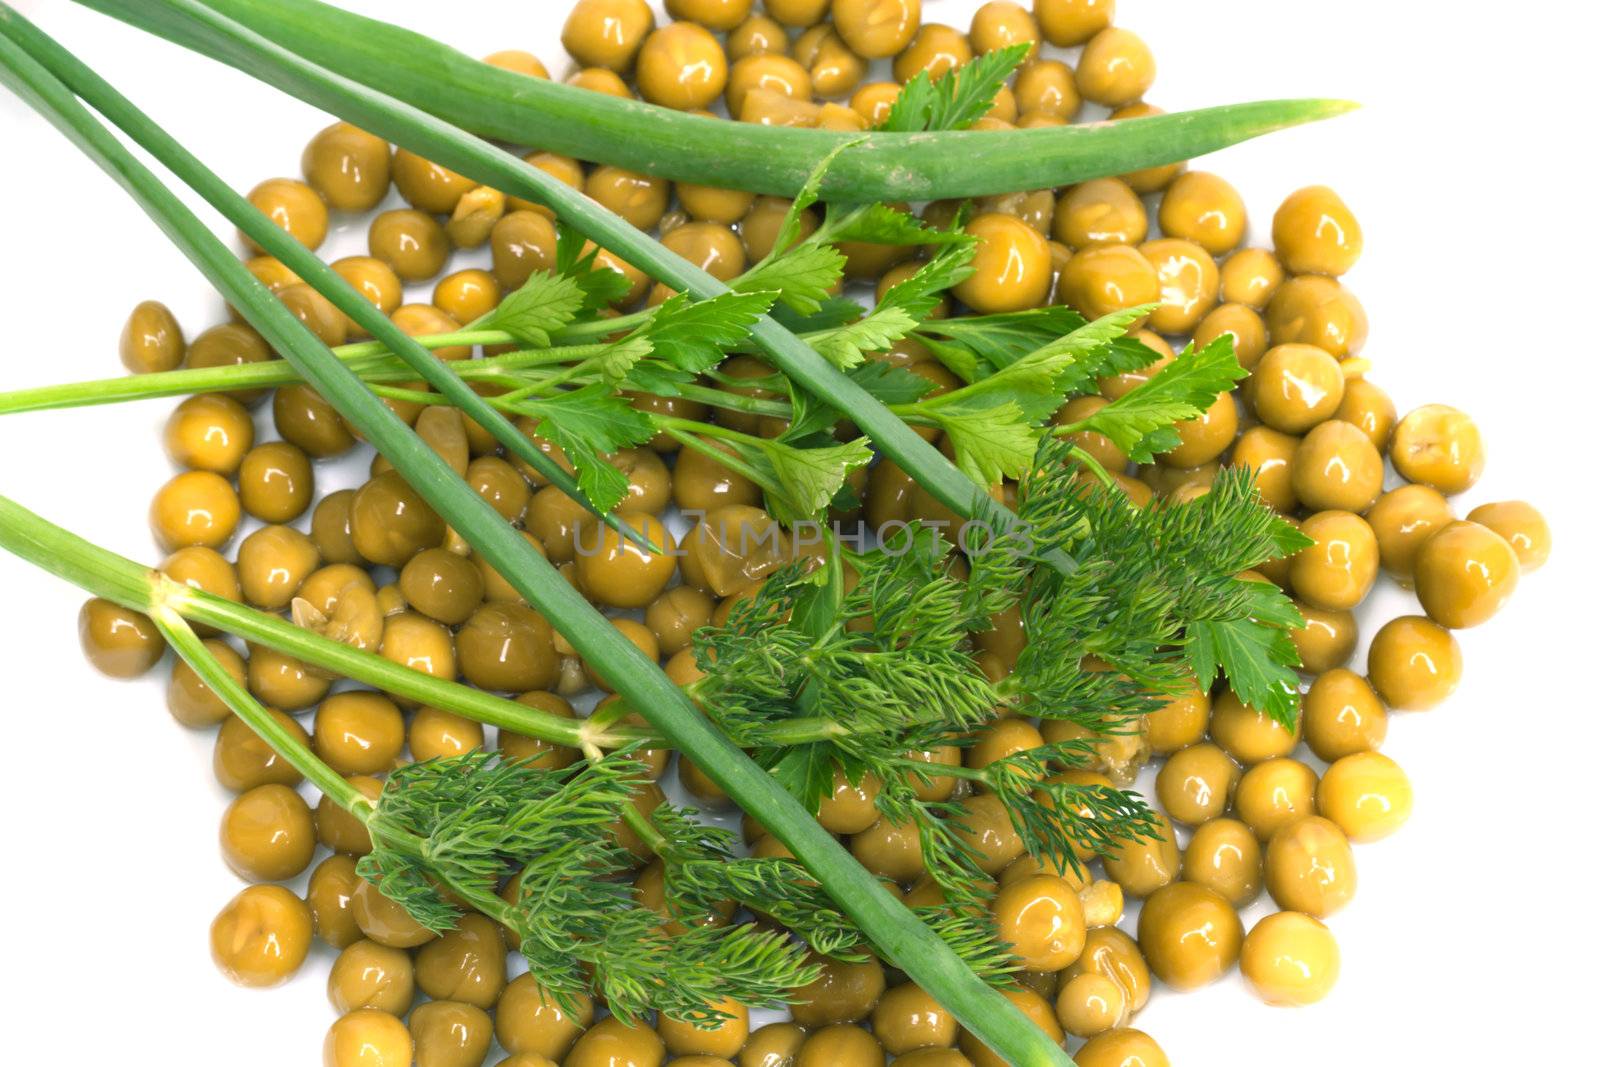 green peas, parsley, dill, onions on a white background by schankz